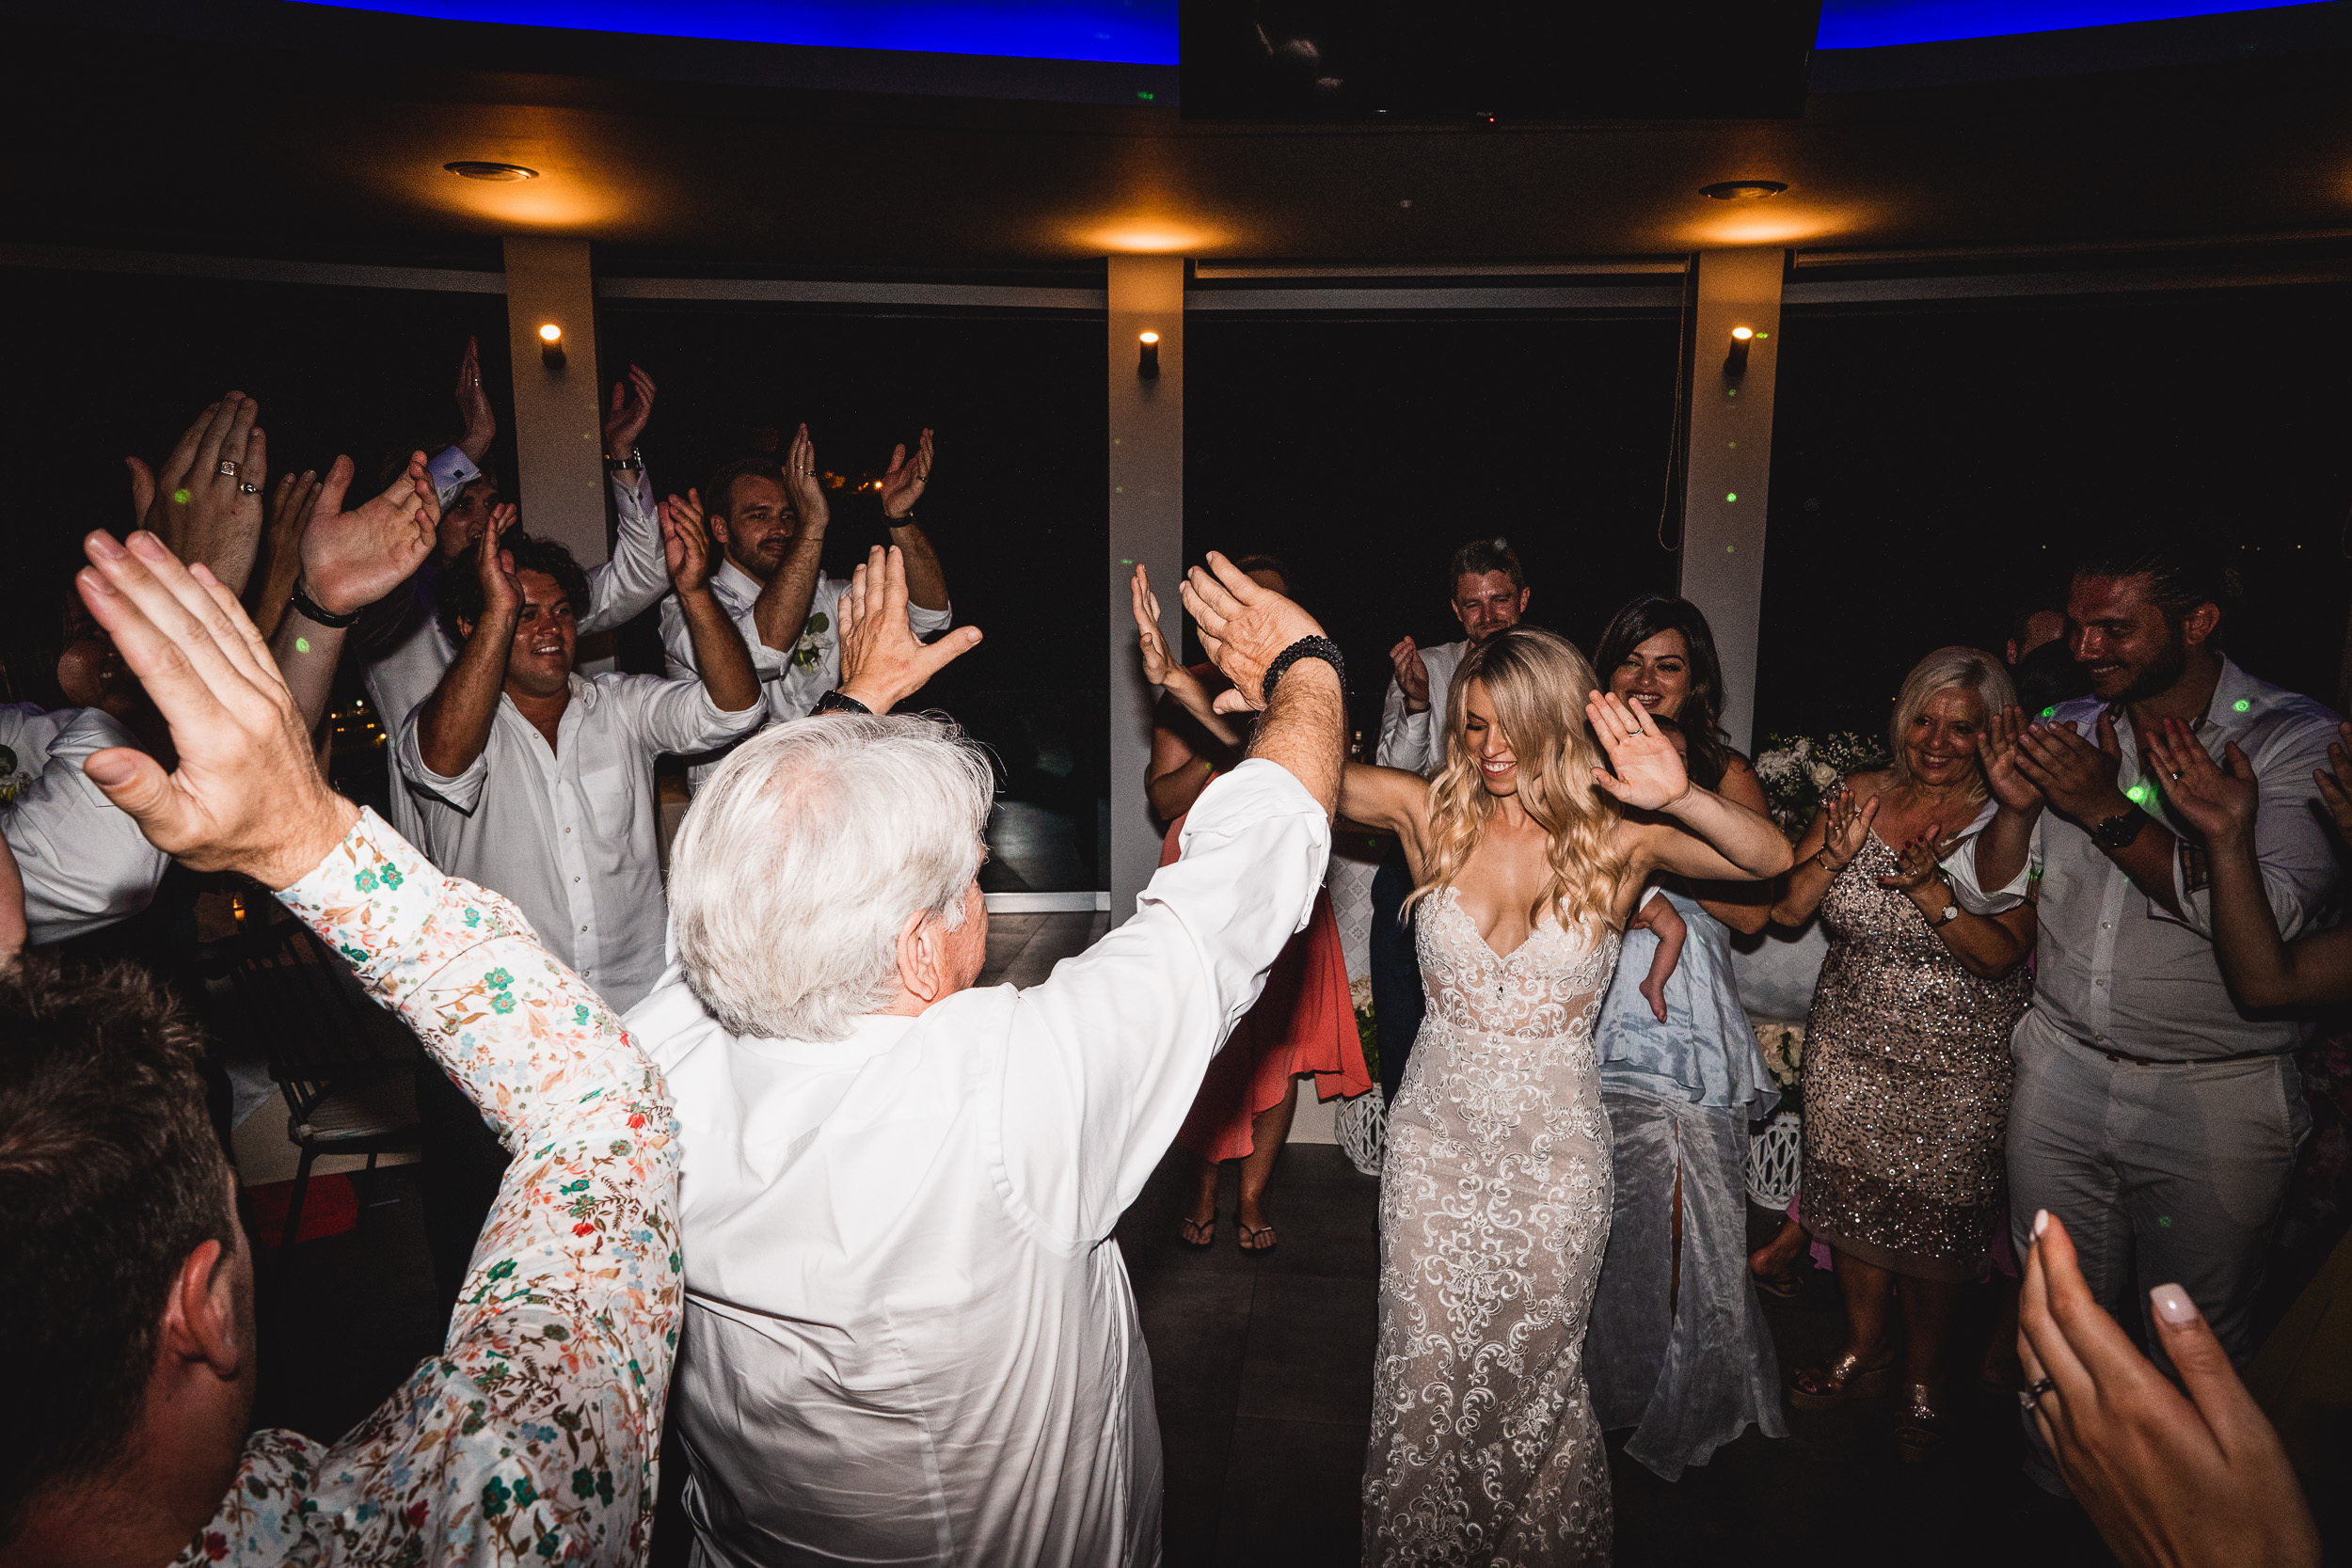 A bride and groom's wedding photo, capturing their dance on the dance floor.